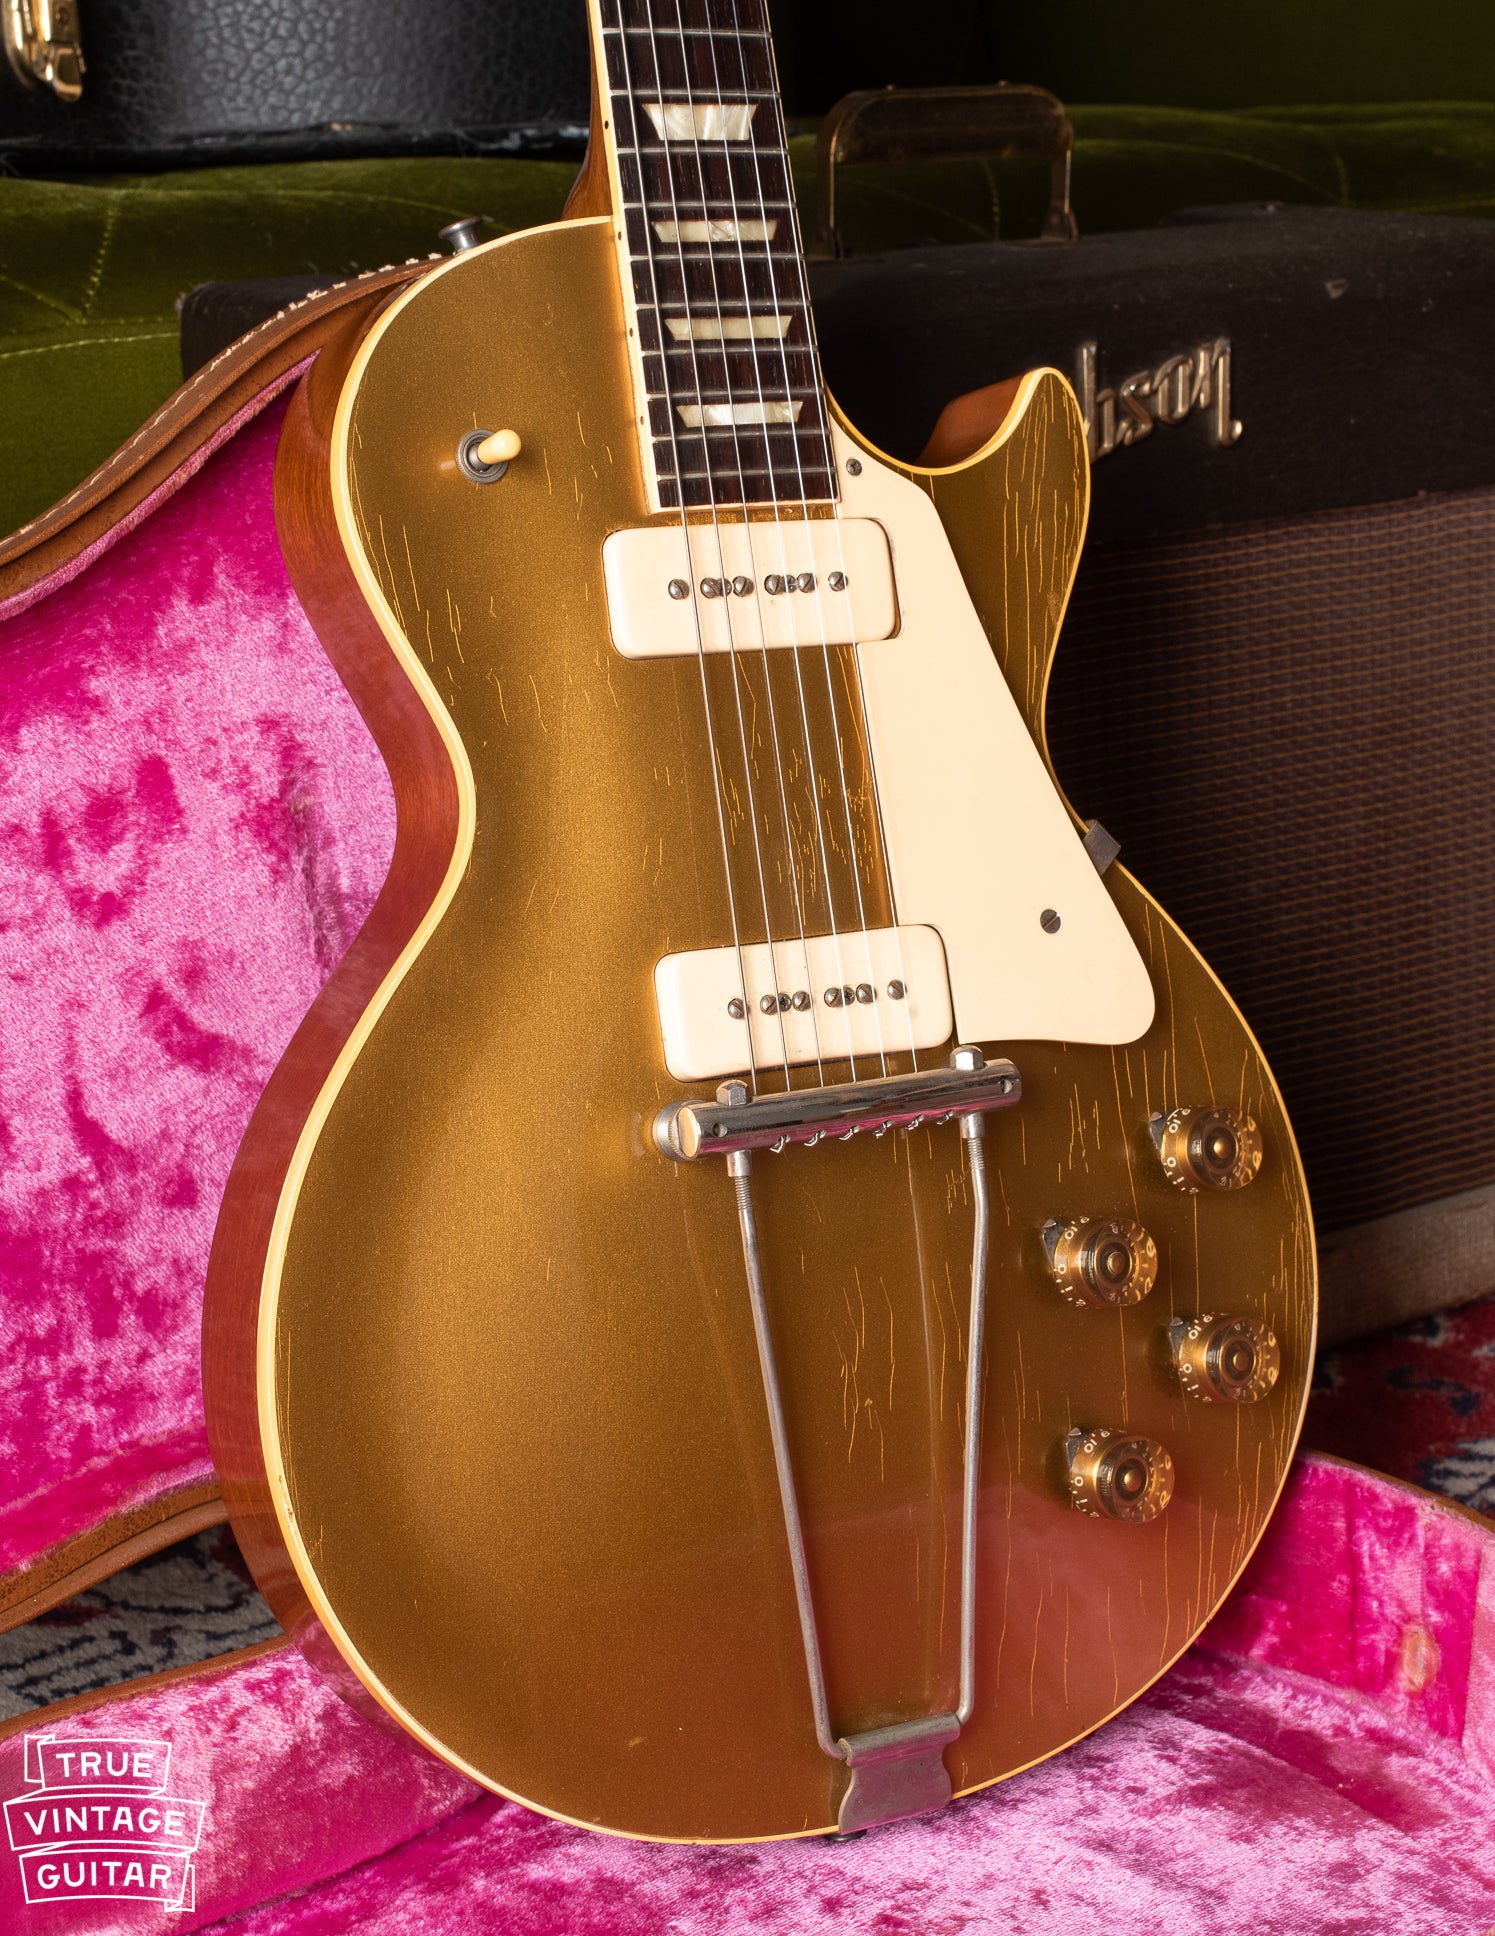 Finish checking on original 1950s Gibson Les Paul goldotp